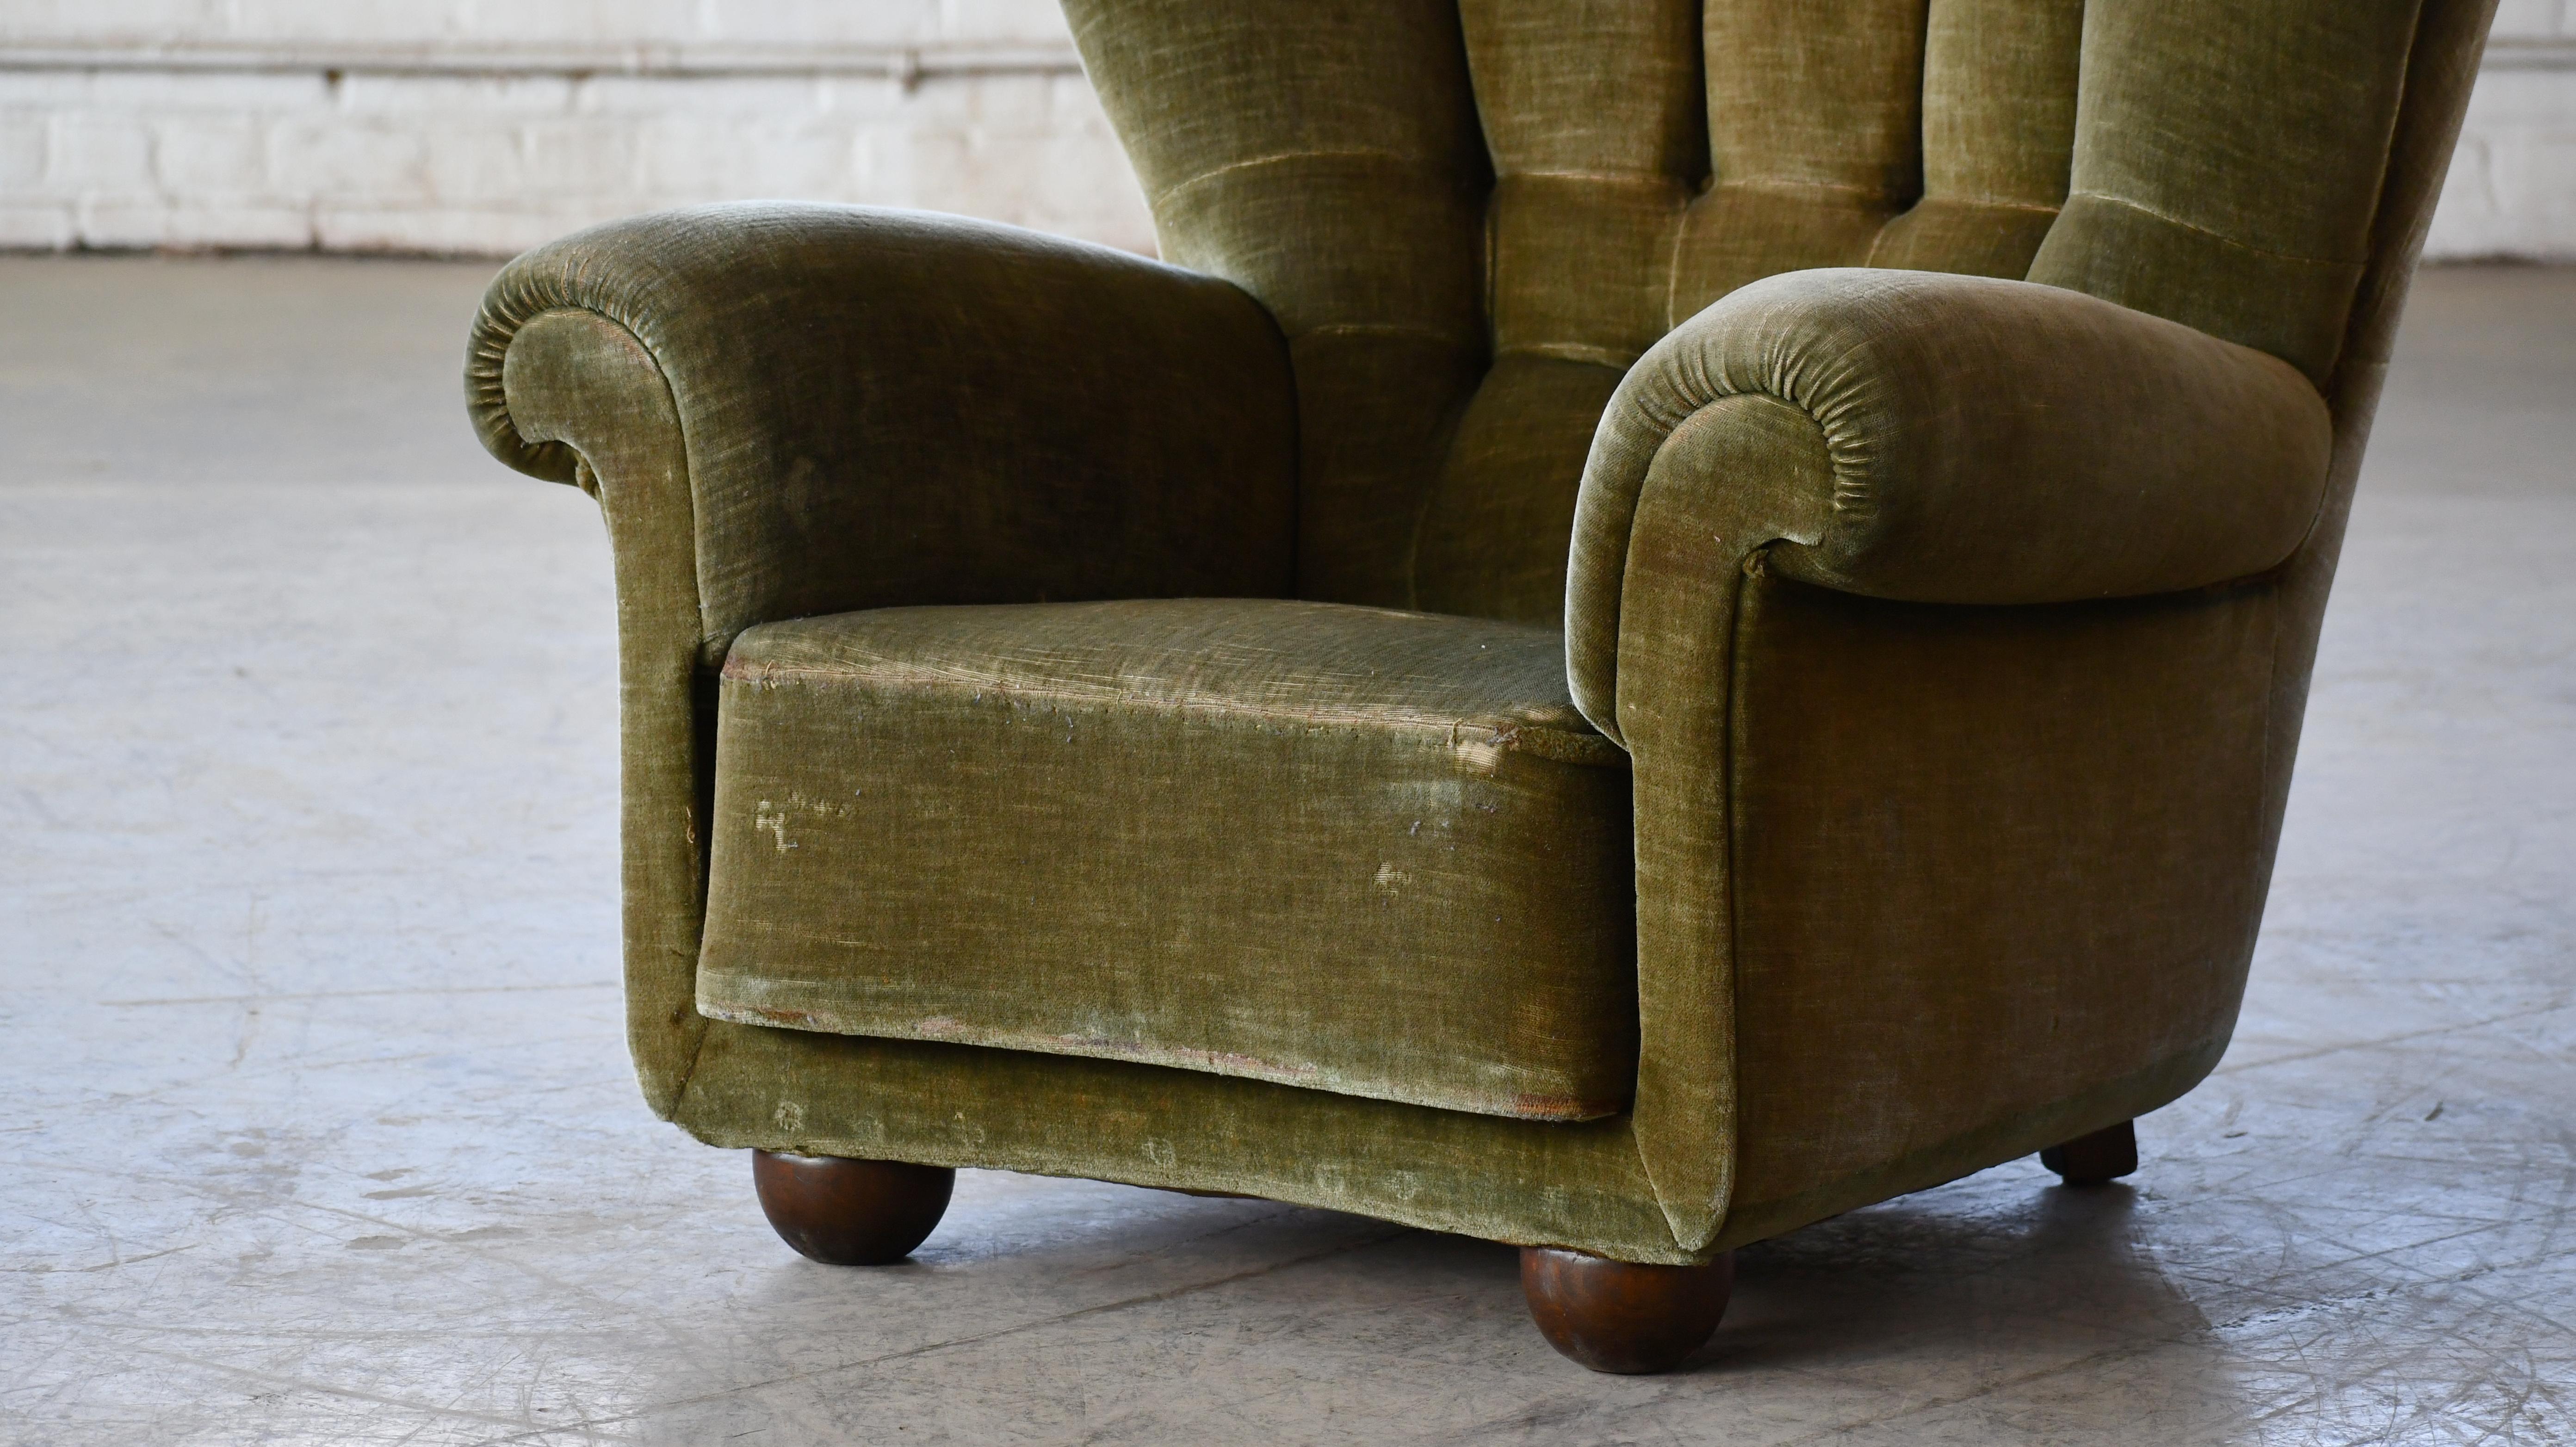 Danish Large Size Club Chair in Original mohair with Channeled Backrest, 1940's For Sale 3